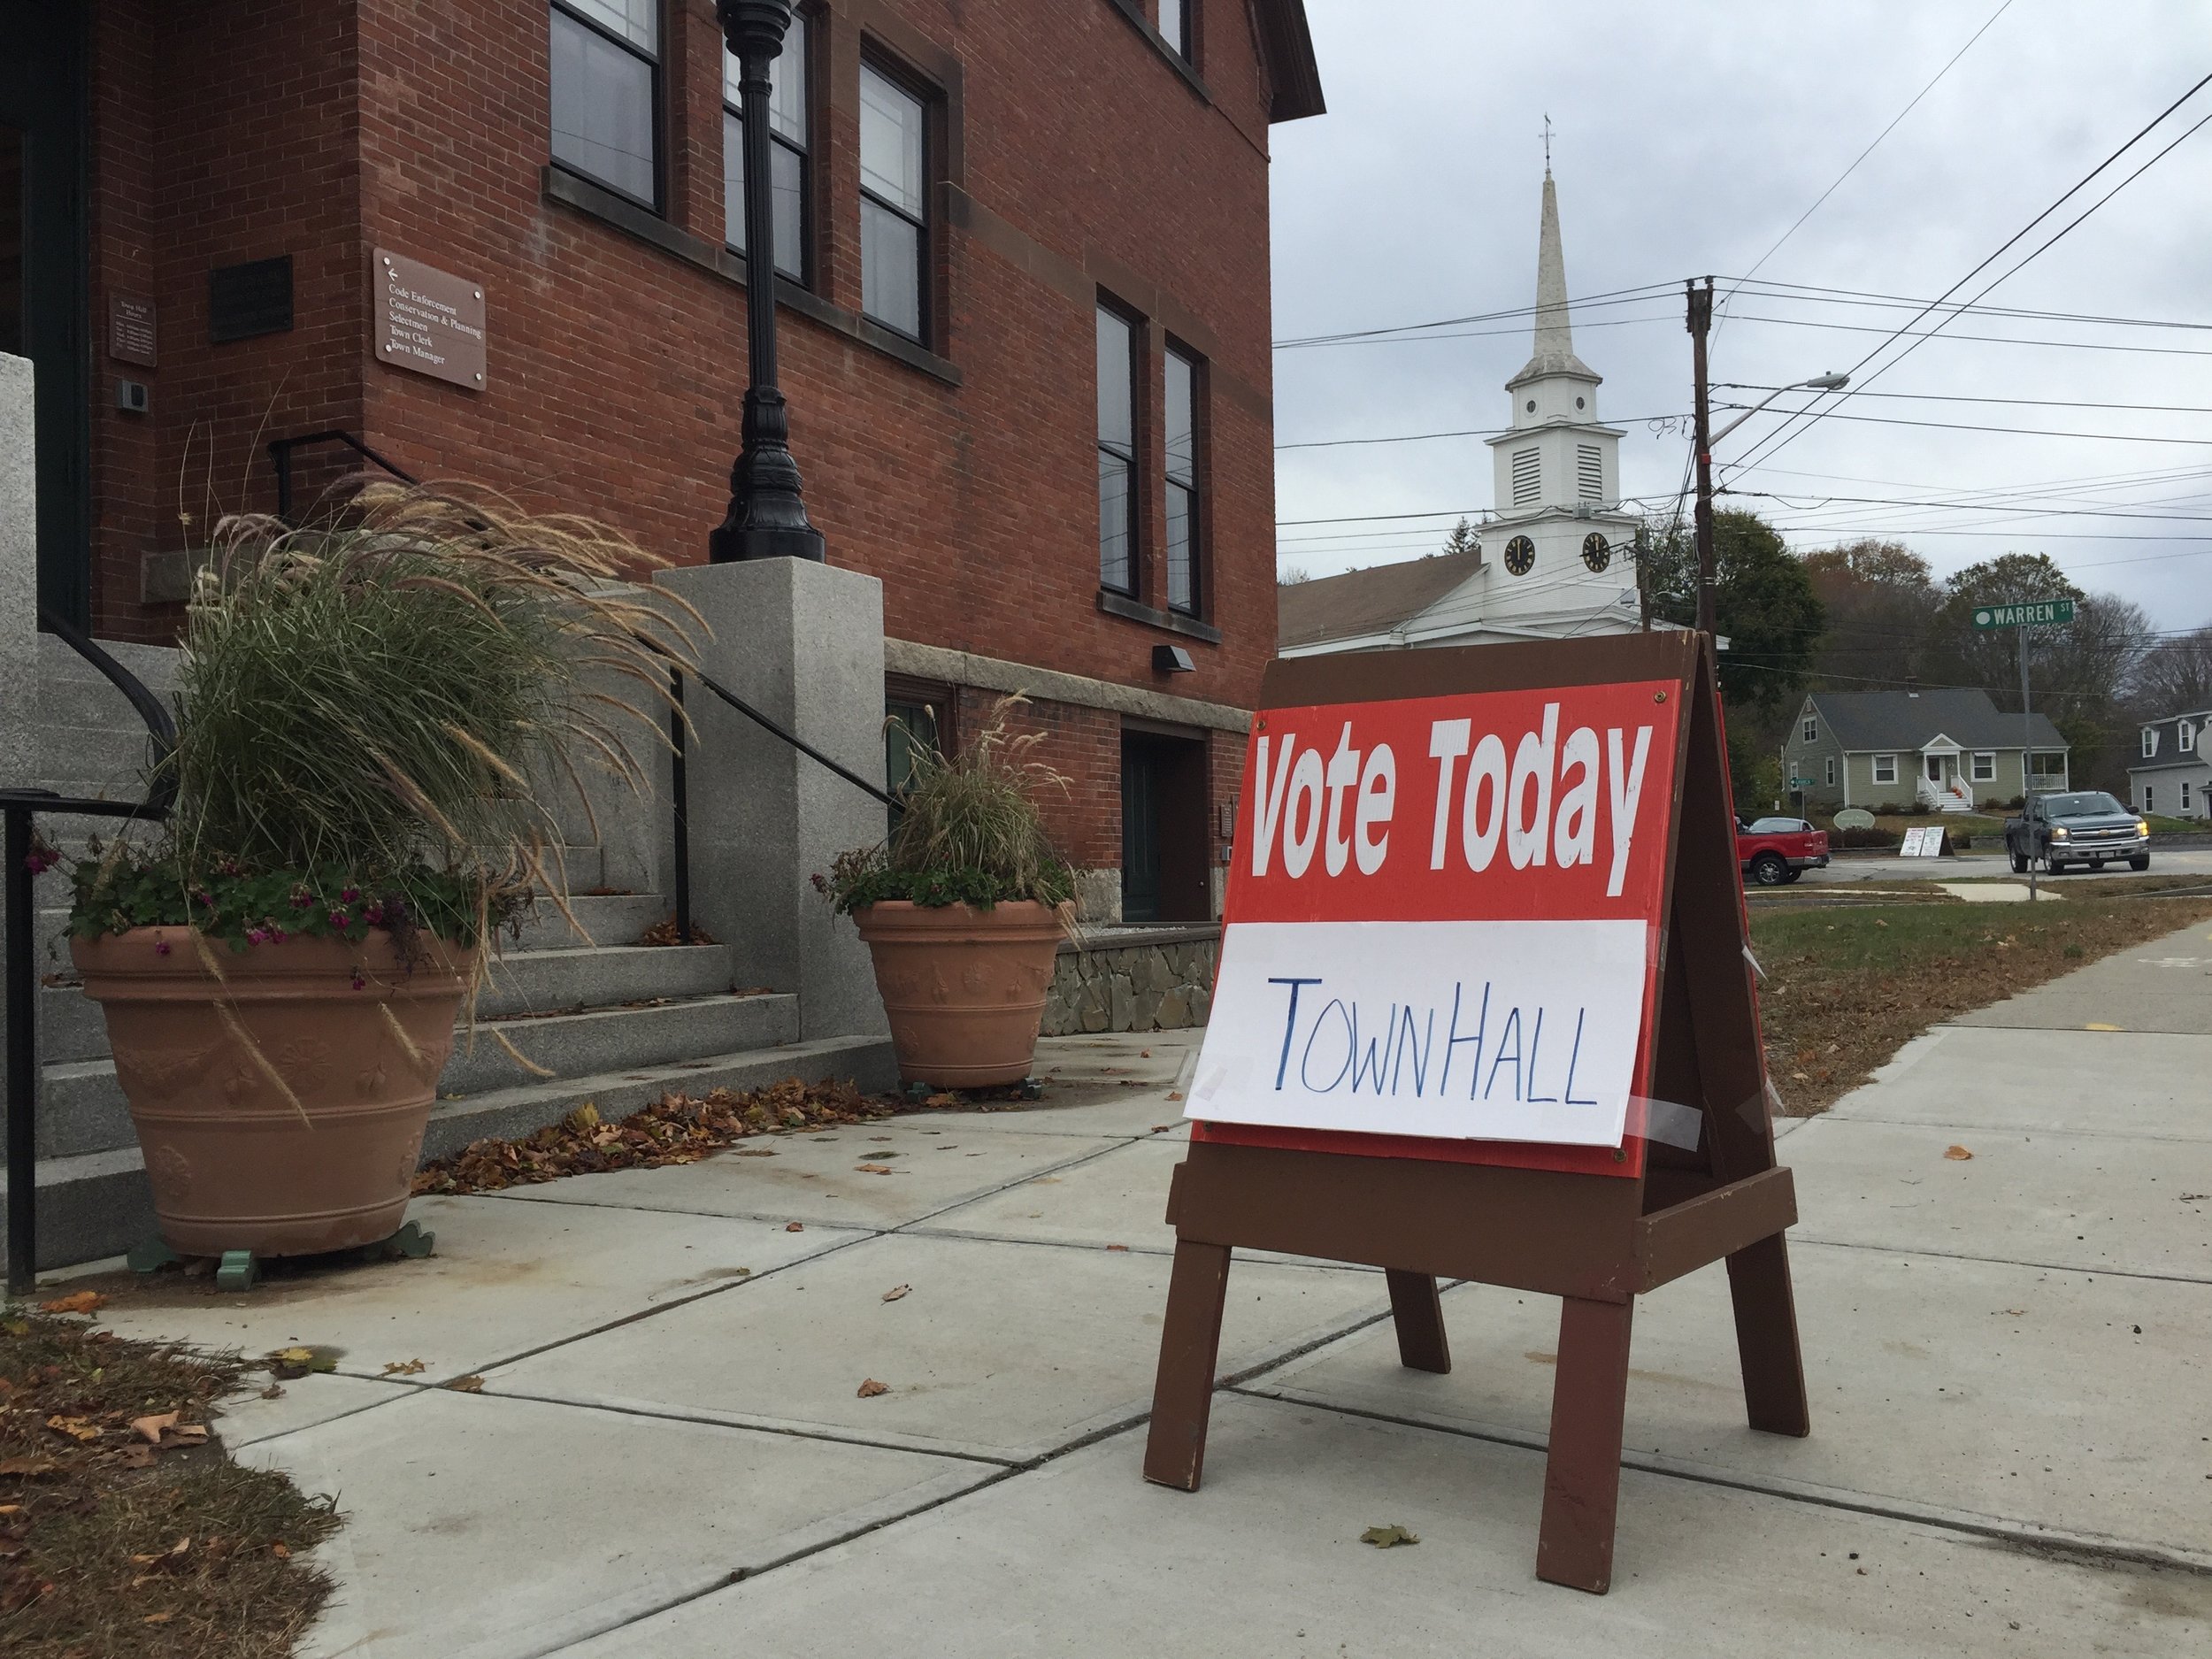  An invitation to vote early in Upton, Mass. 